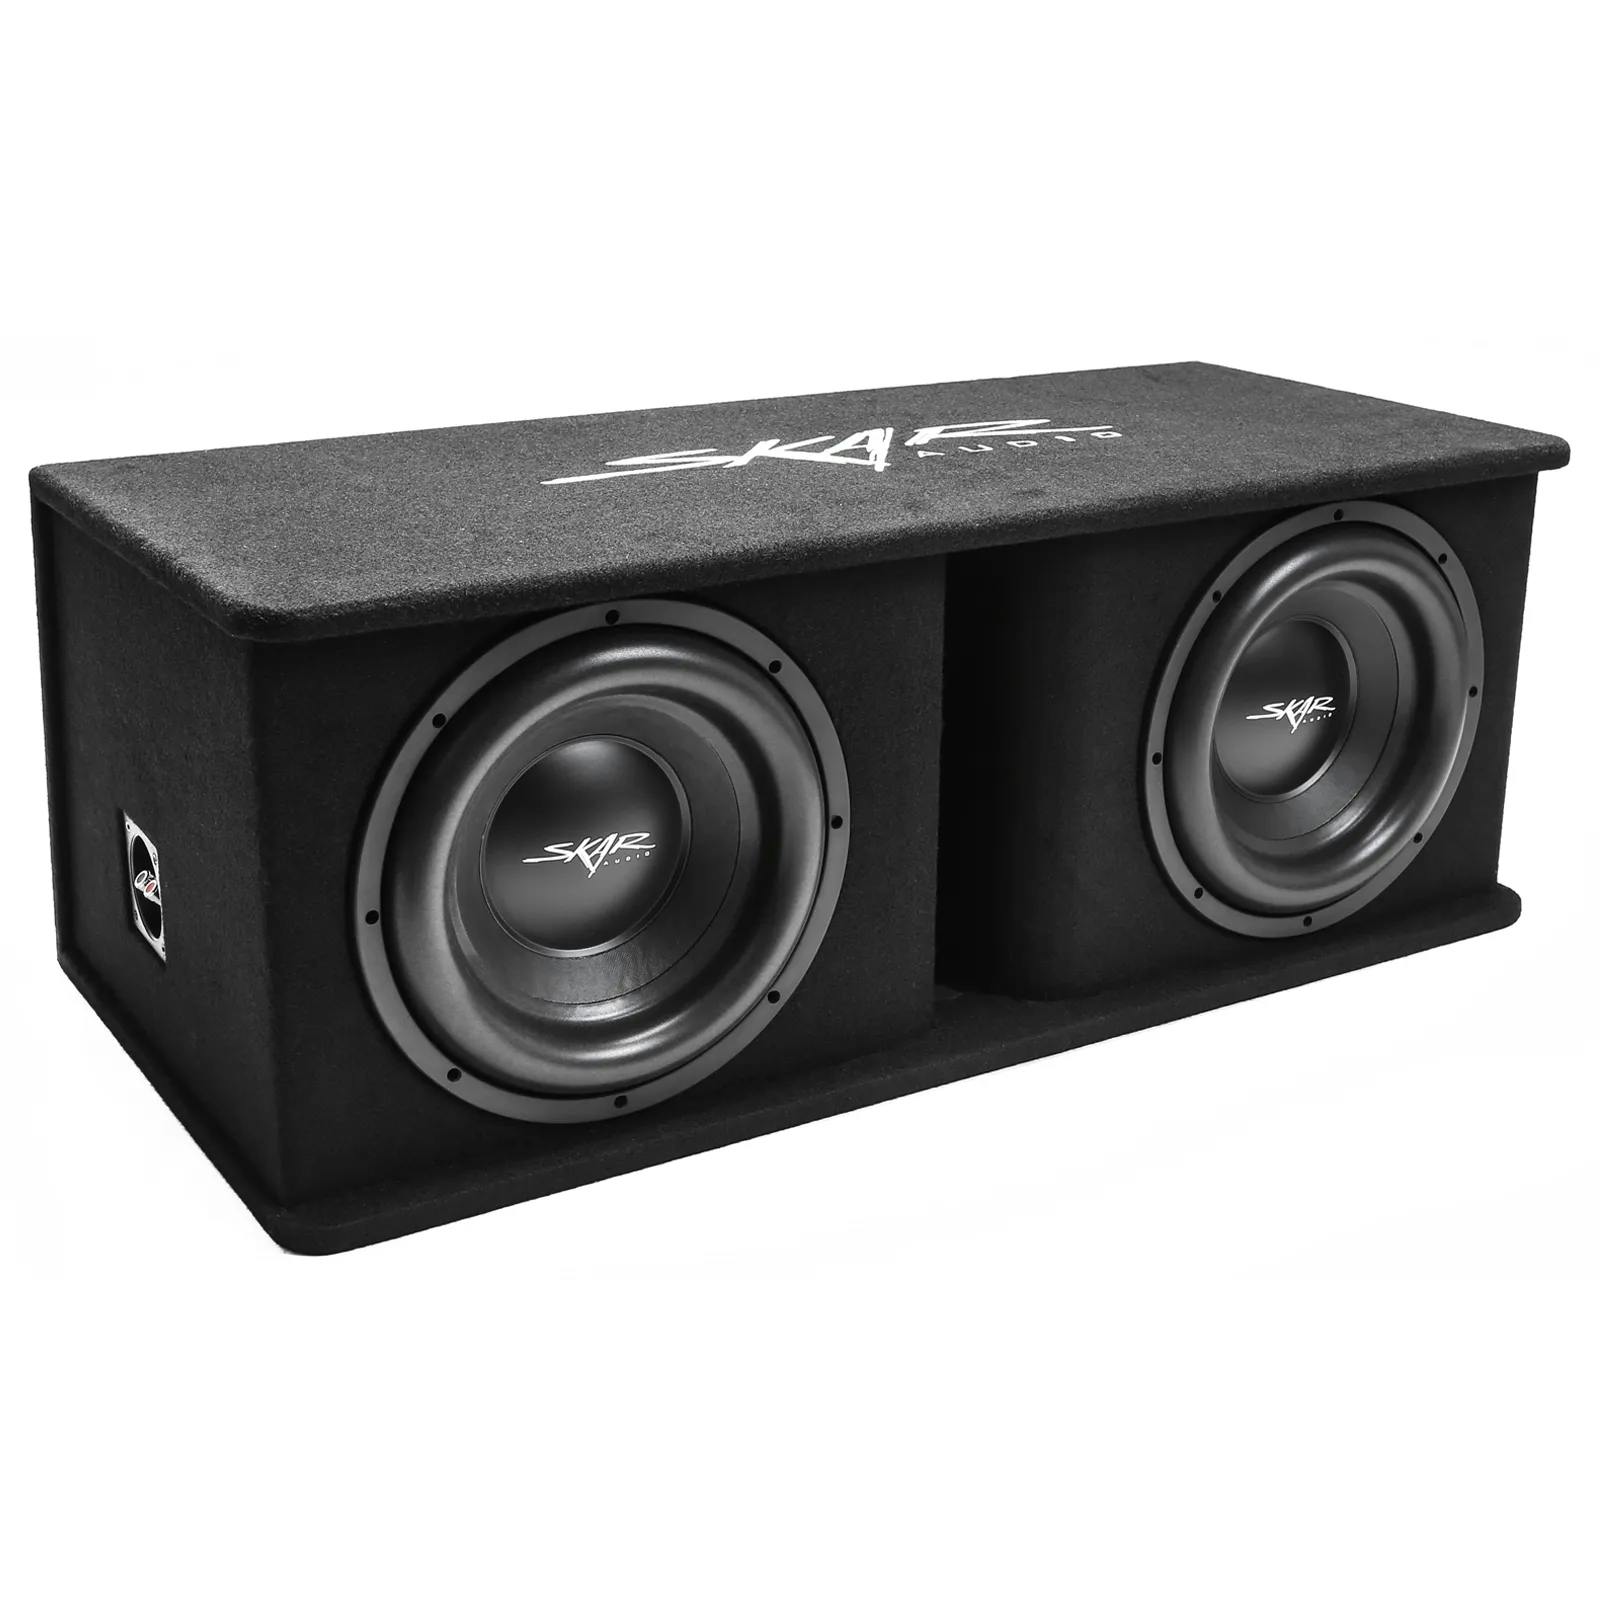 Featured Product Photo for SDR-2X12D4 | Dual 12" 2,400 Watt SDR Series Loaded Vented Subwoofer Enclosure